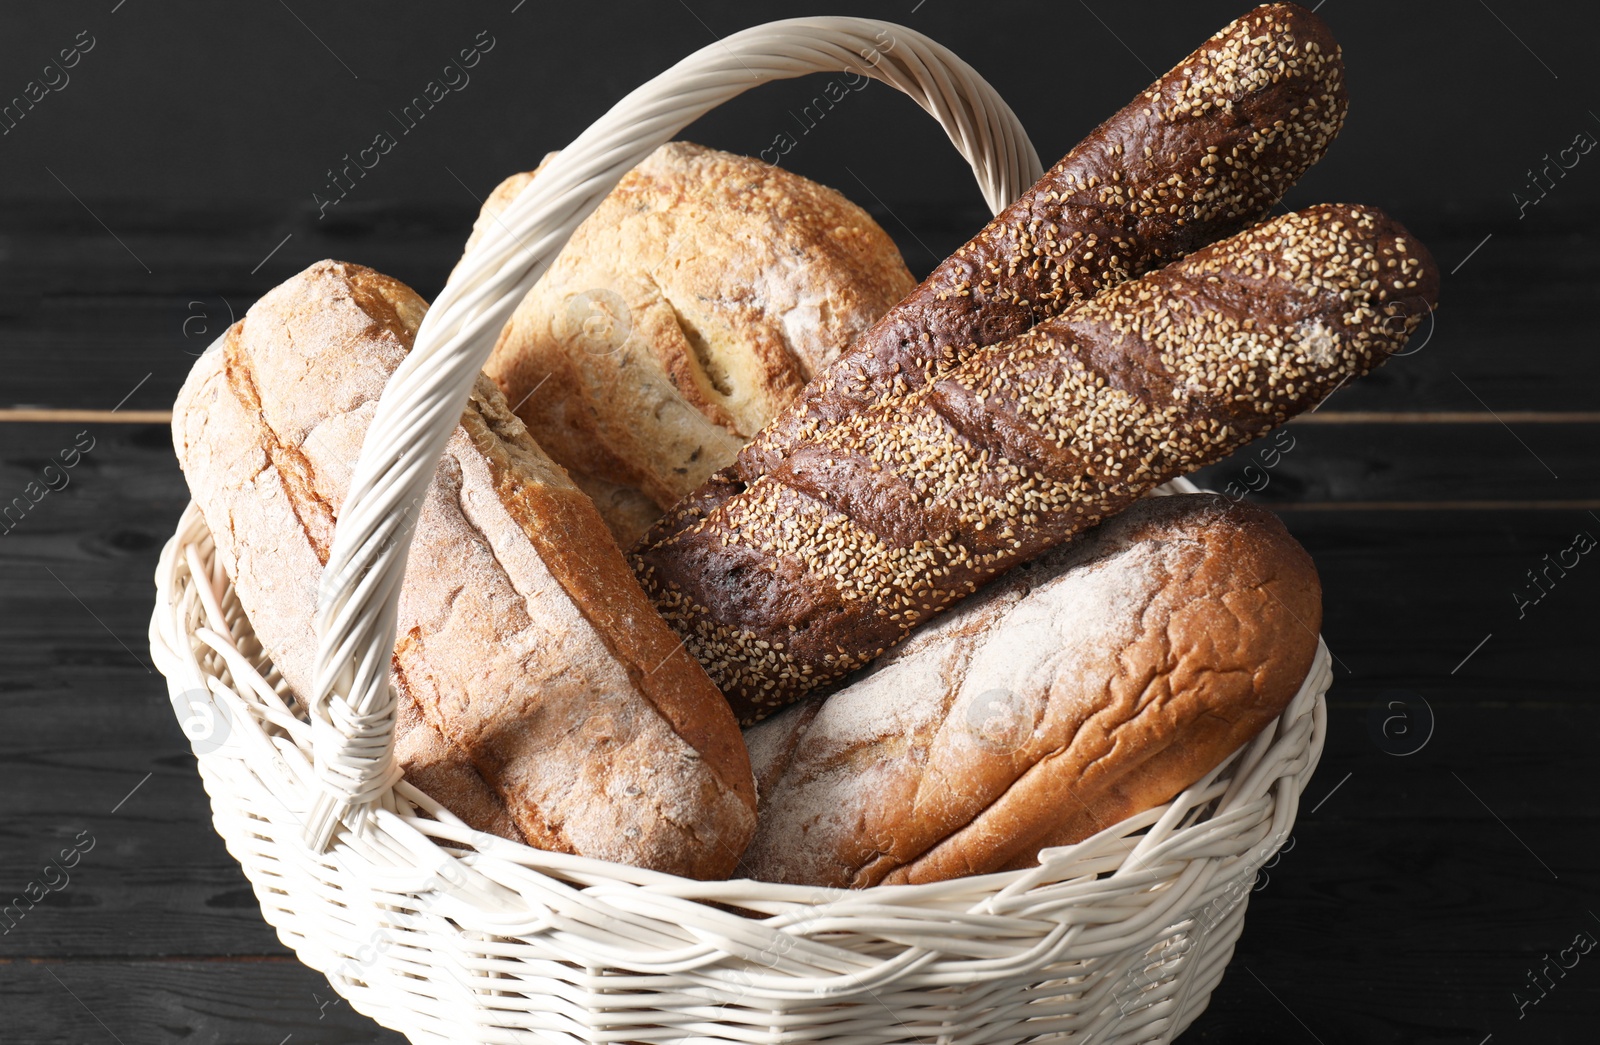 Photo of Wicker basket with different types of fresh bread on black wooden table